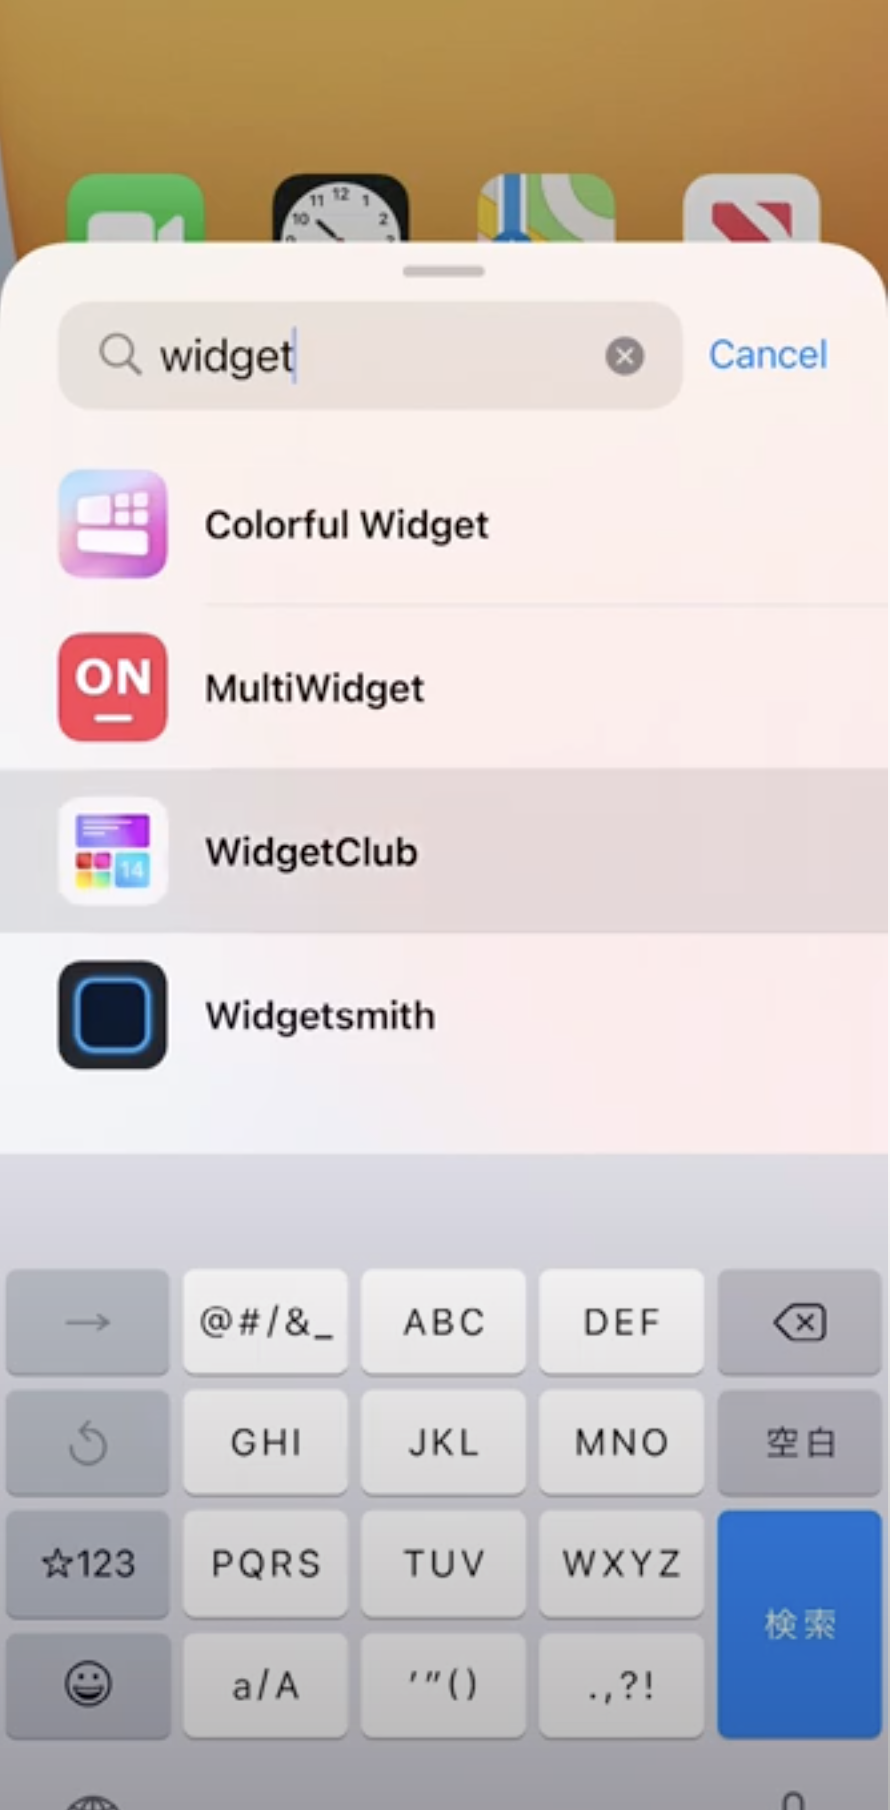 #3 image of [iOS]How to add widget to my home screen